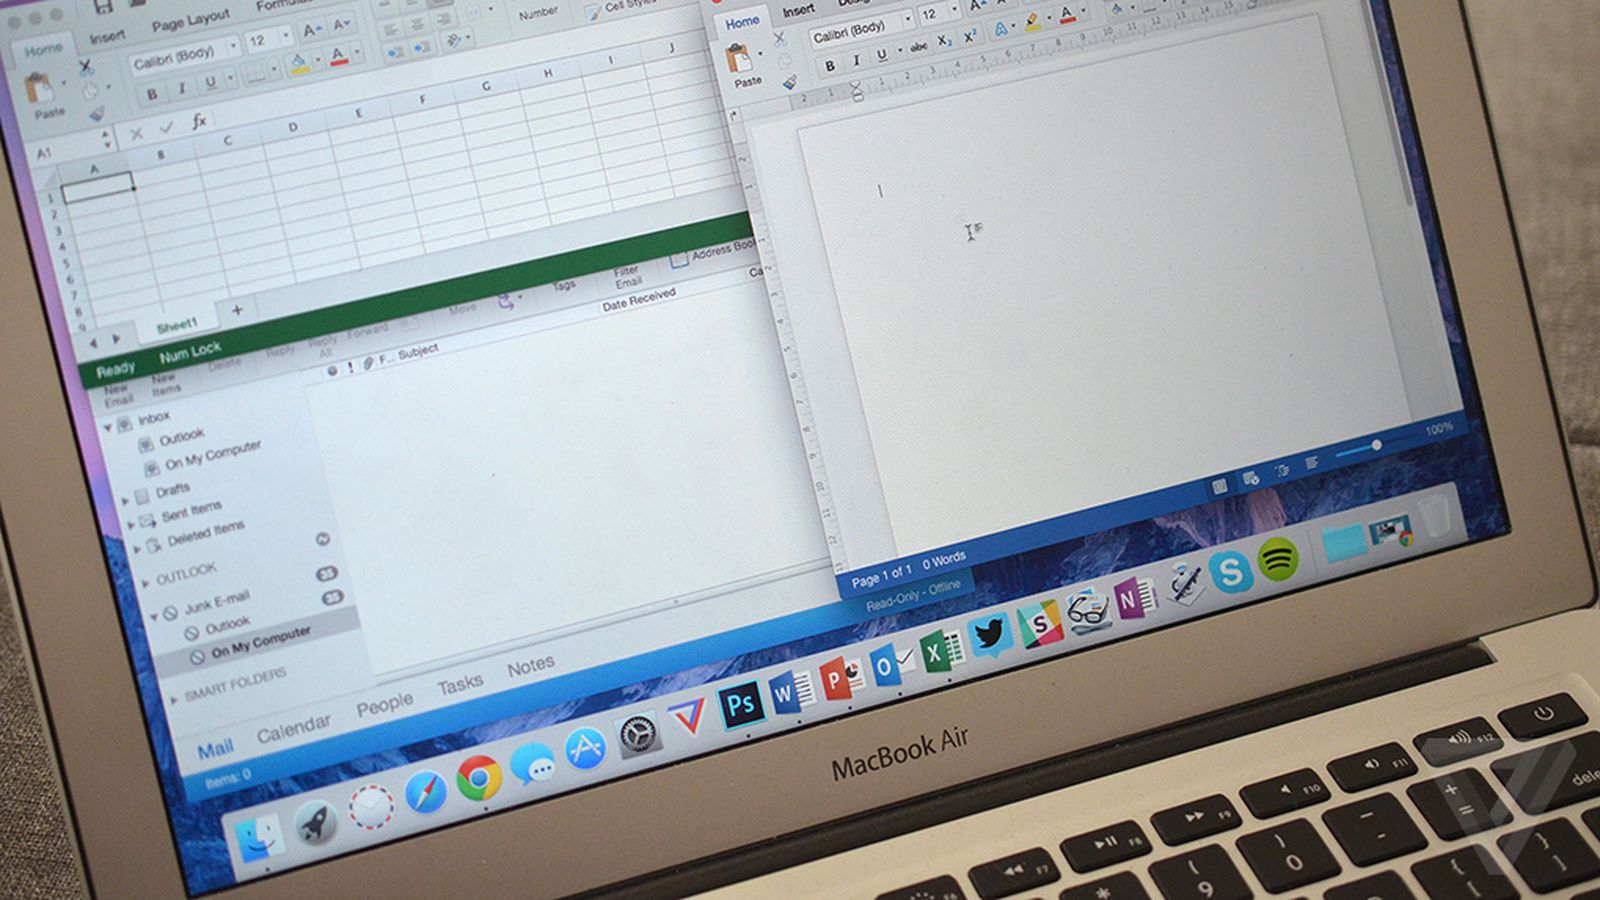 ms office for windows 10 on mac